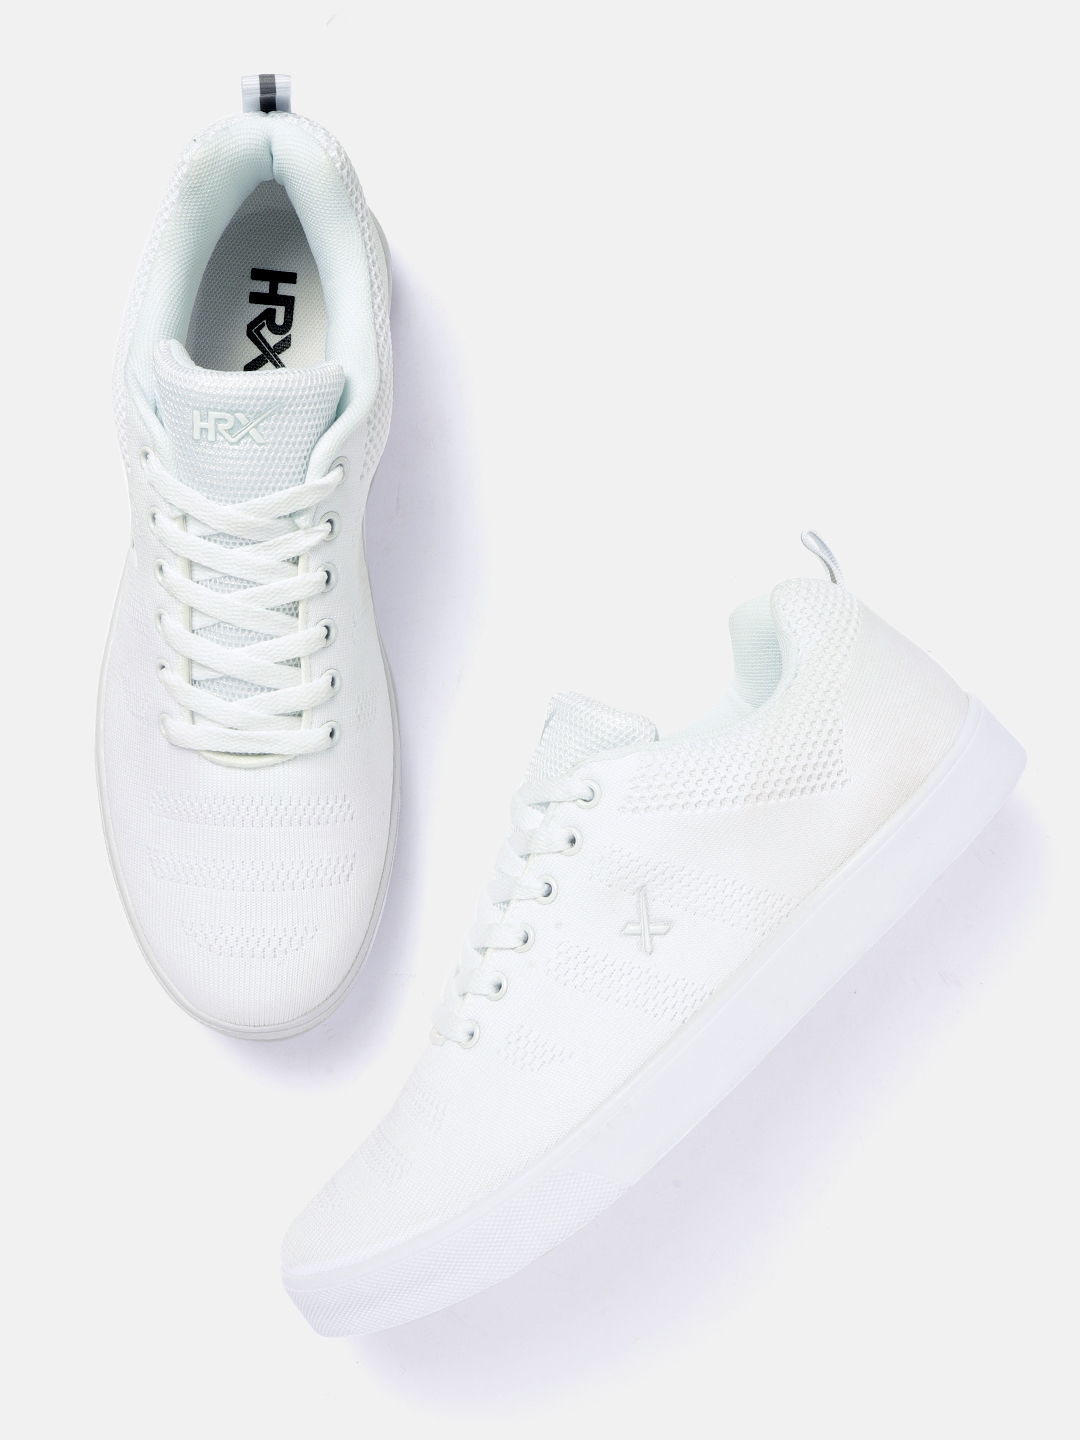 Details 91+ hrx white shoes myntra